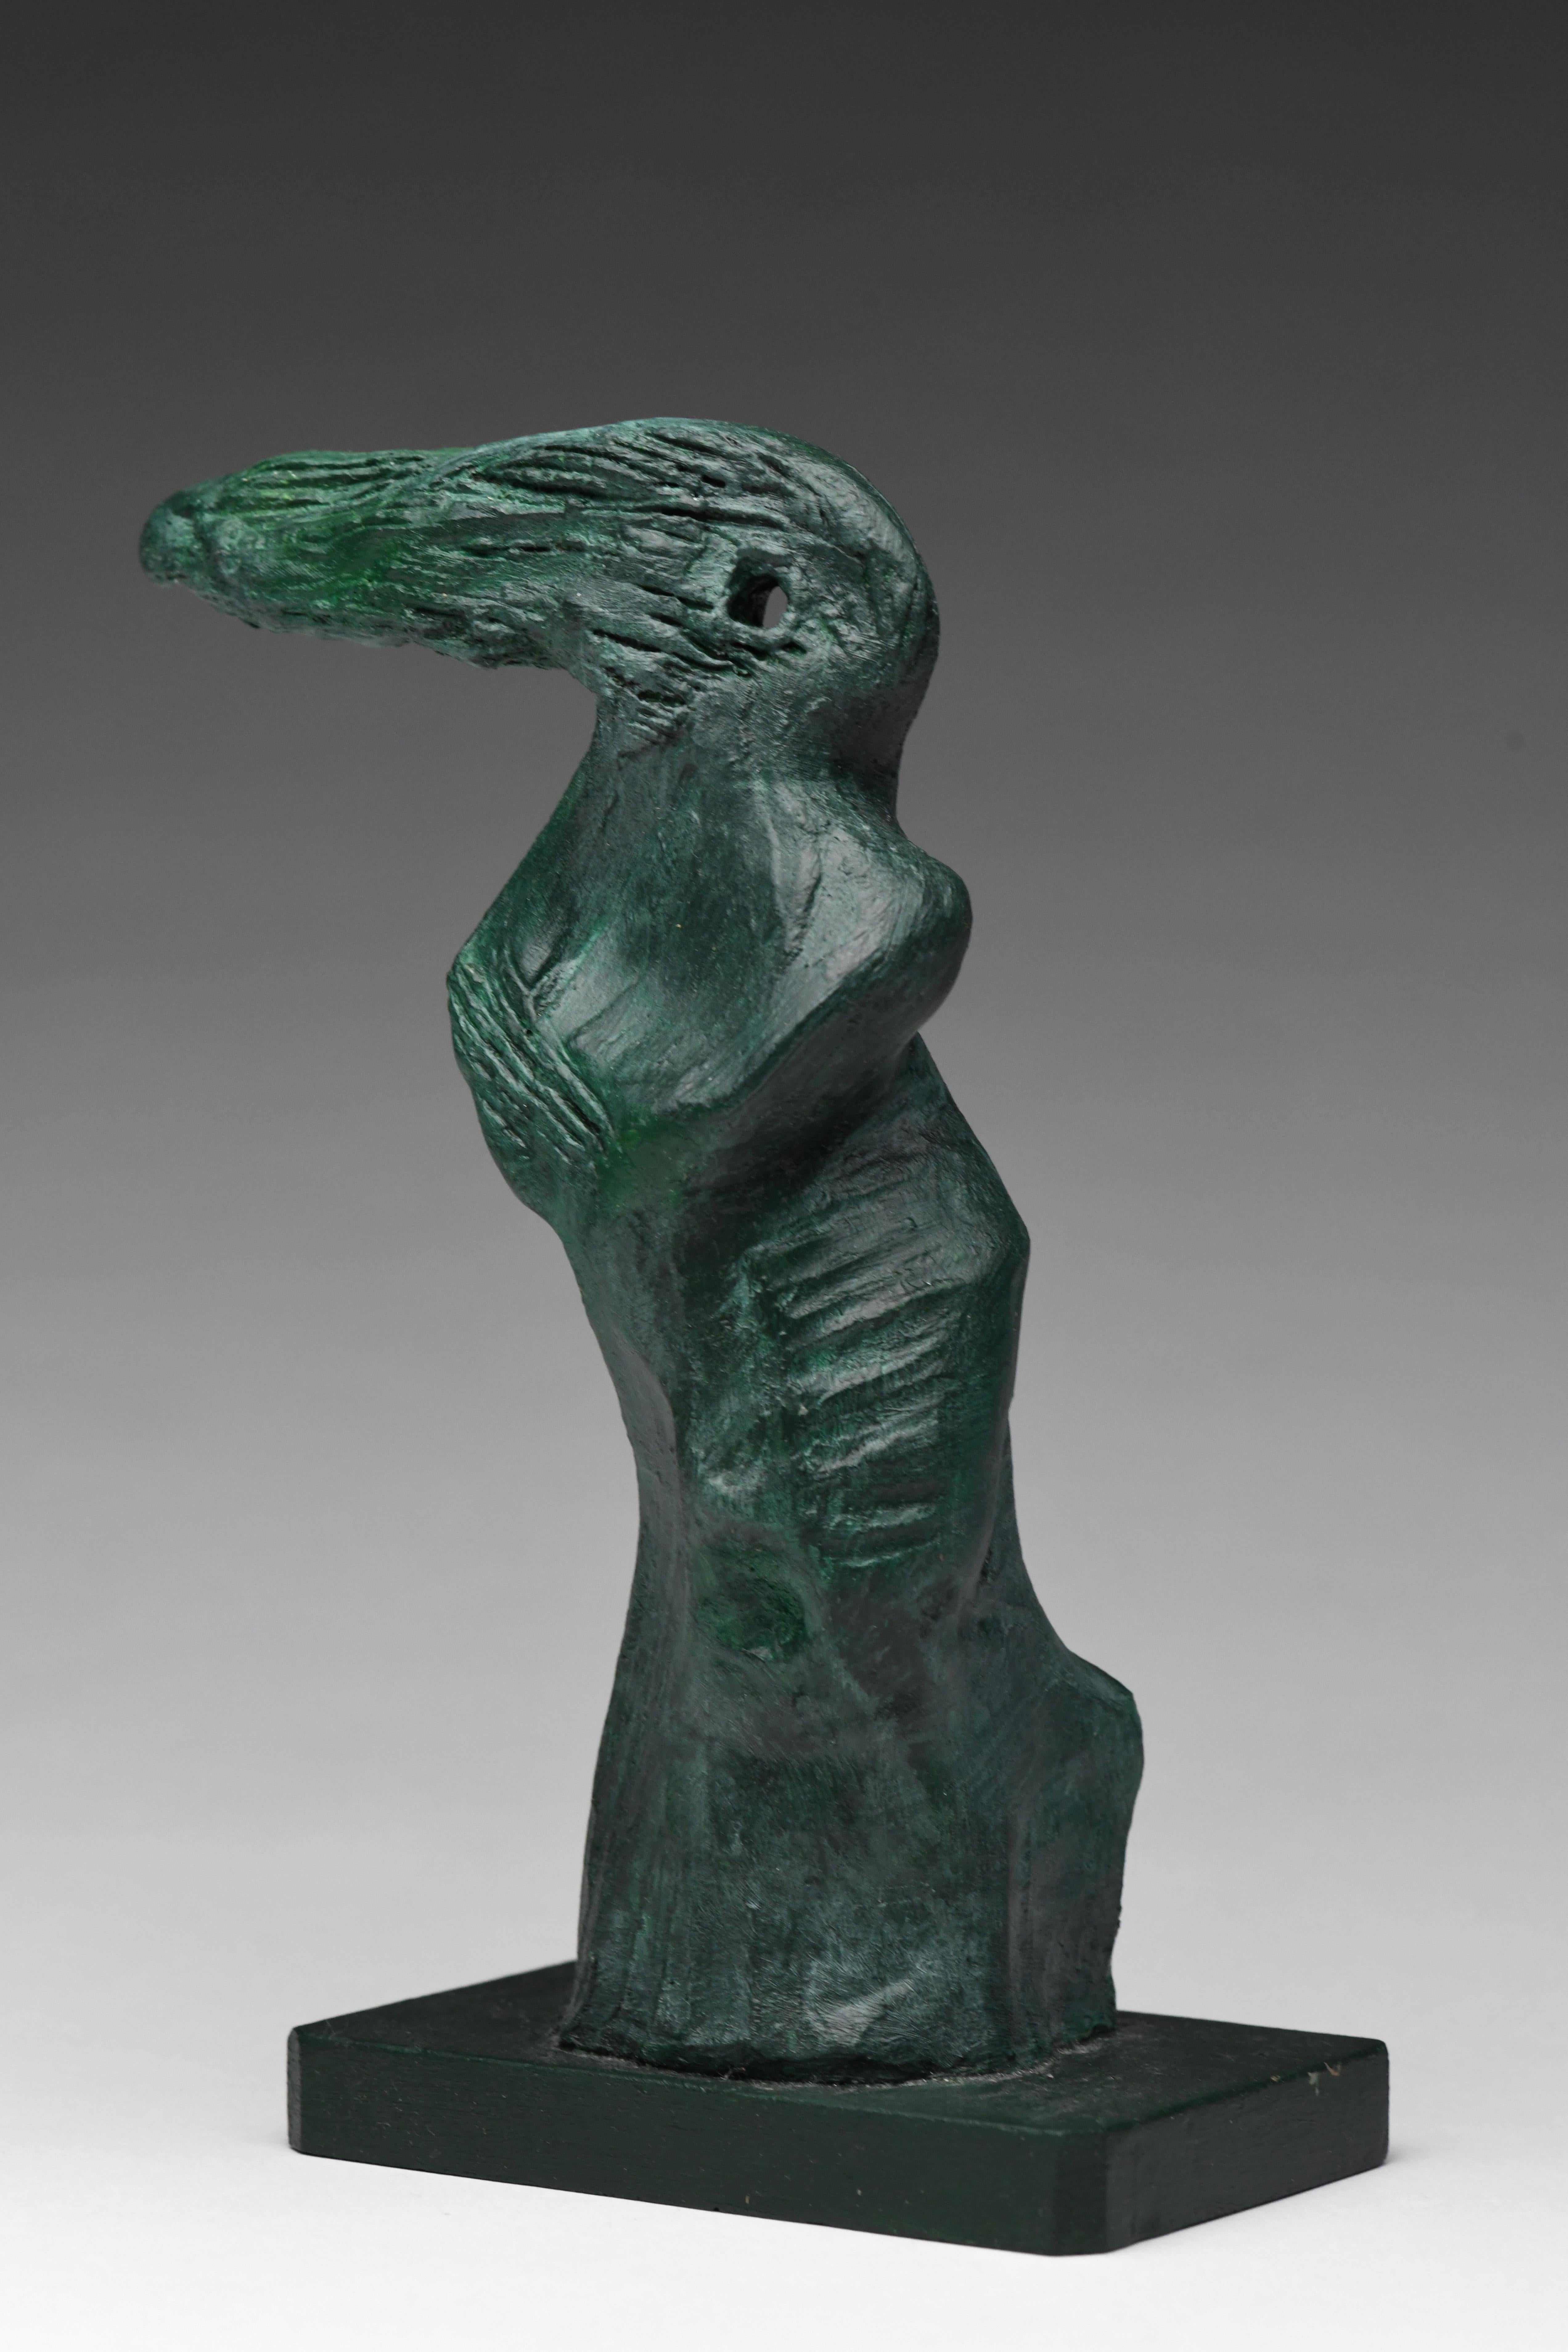 In the Wind - Gray Figurative Sculpture by Elizabeth Freire